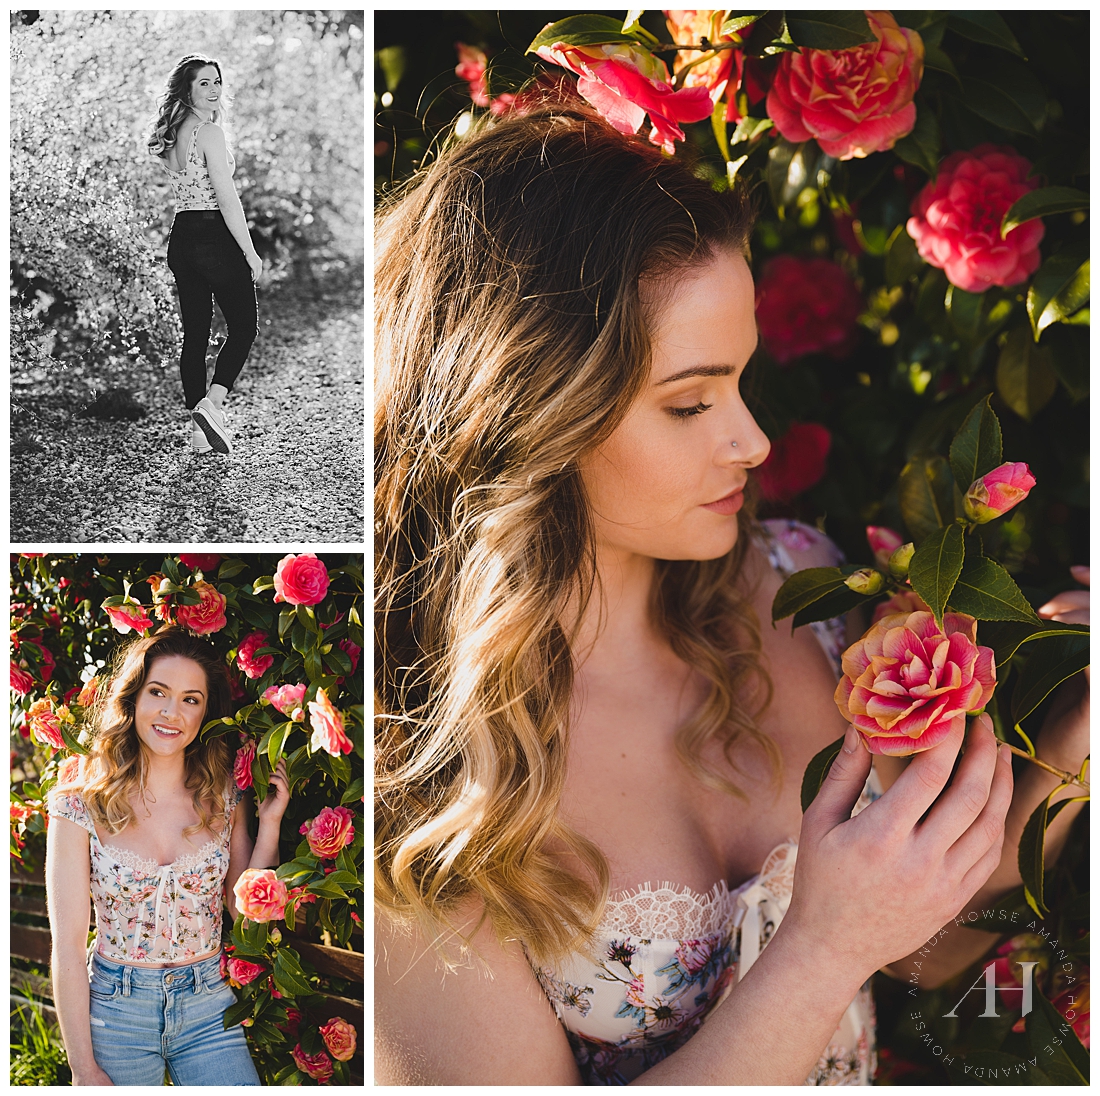 Senior Portraits in a Garden | Spring Blossom Themed Portraits in Tacoma | Photographed by the Best Tacoma Senior Portrait Photographer Amanda Howse Photography 